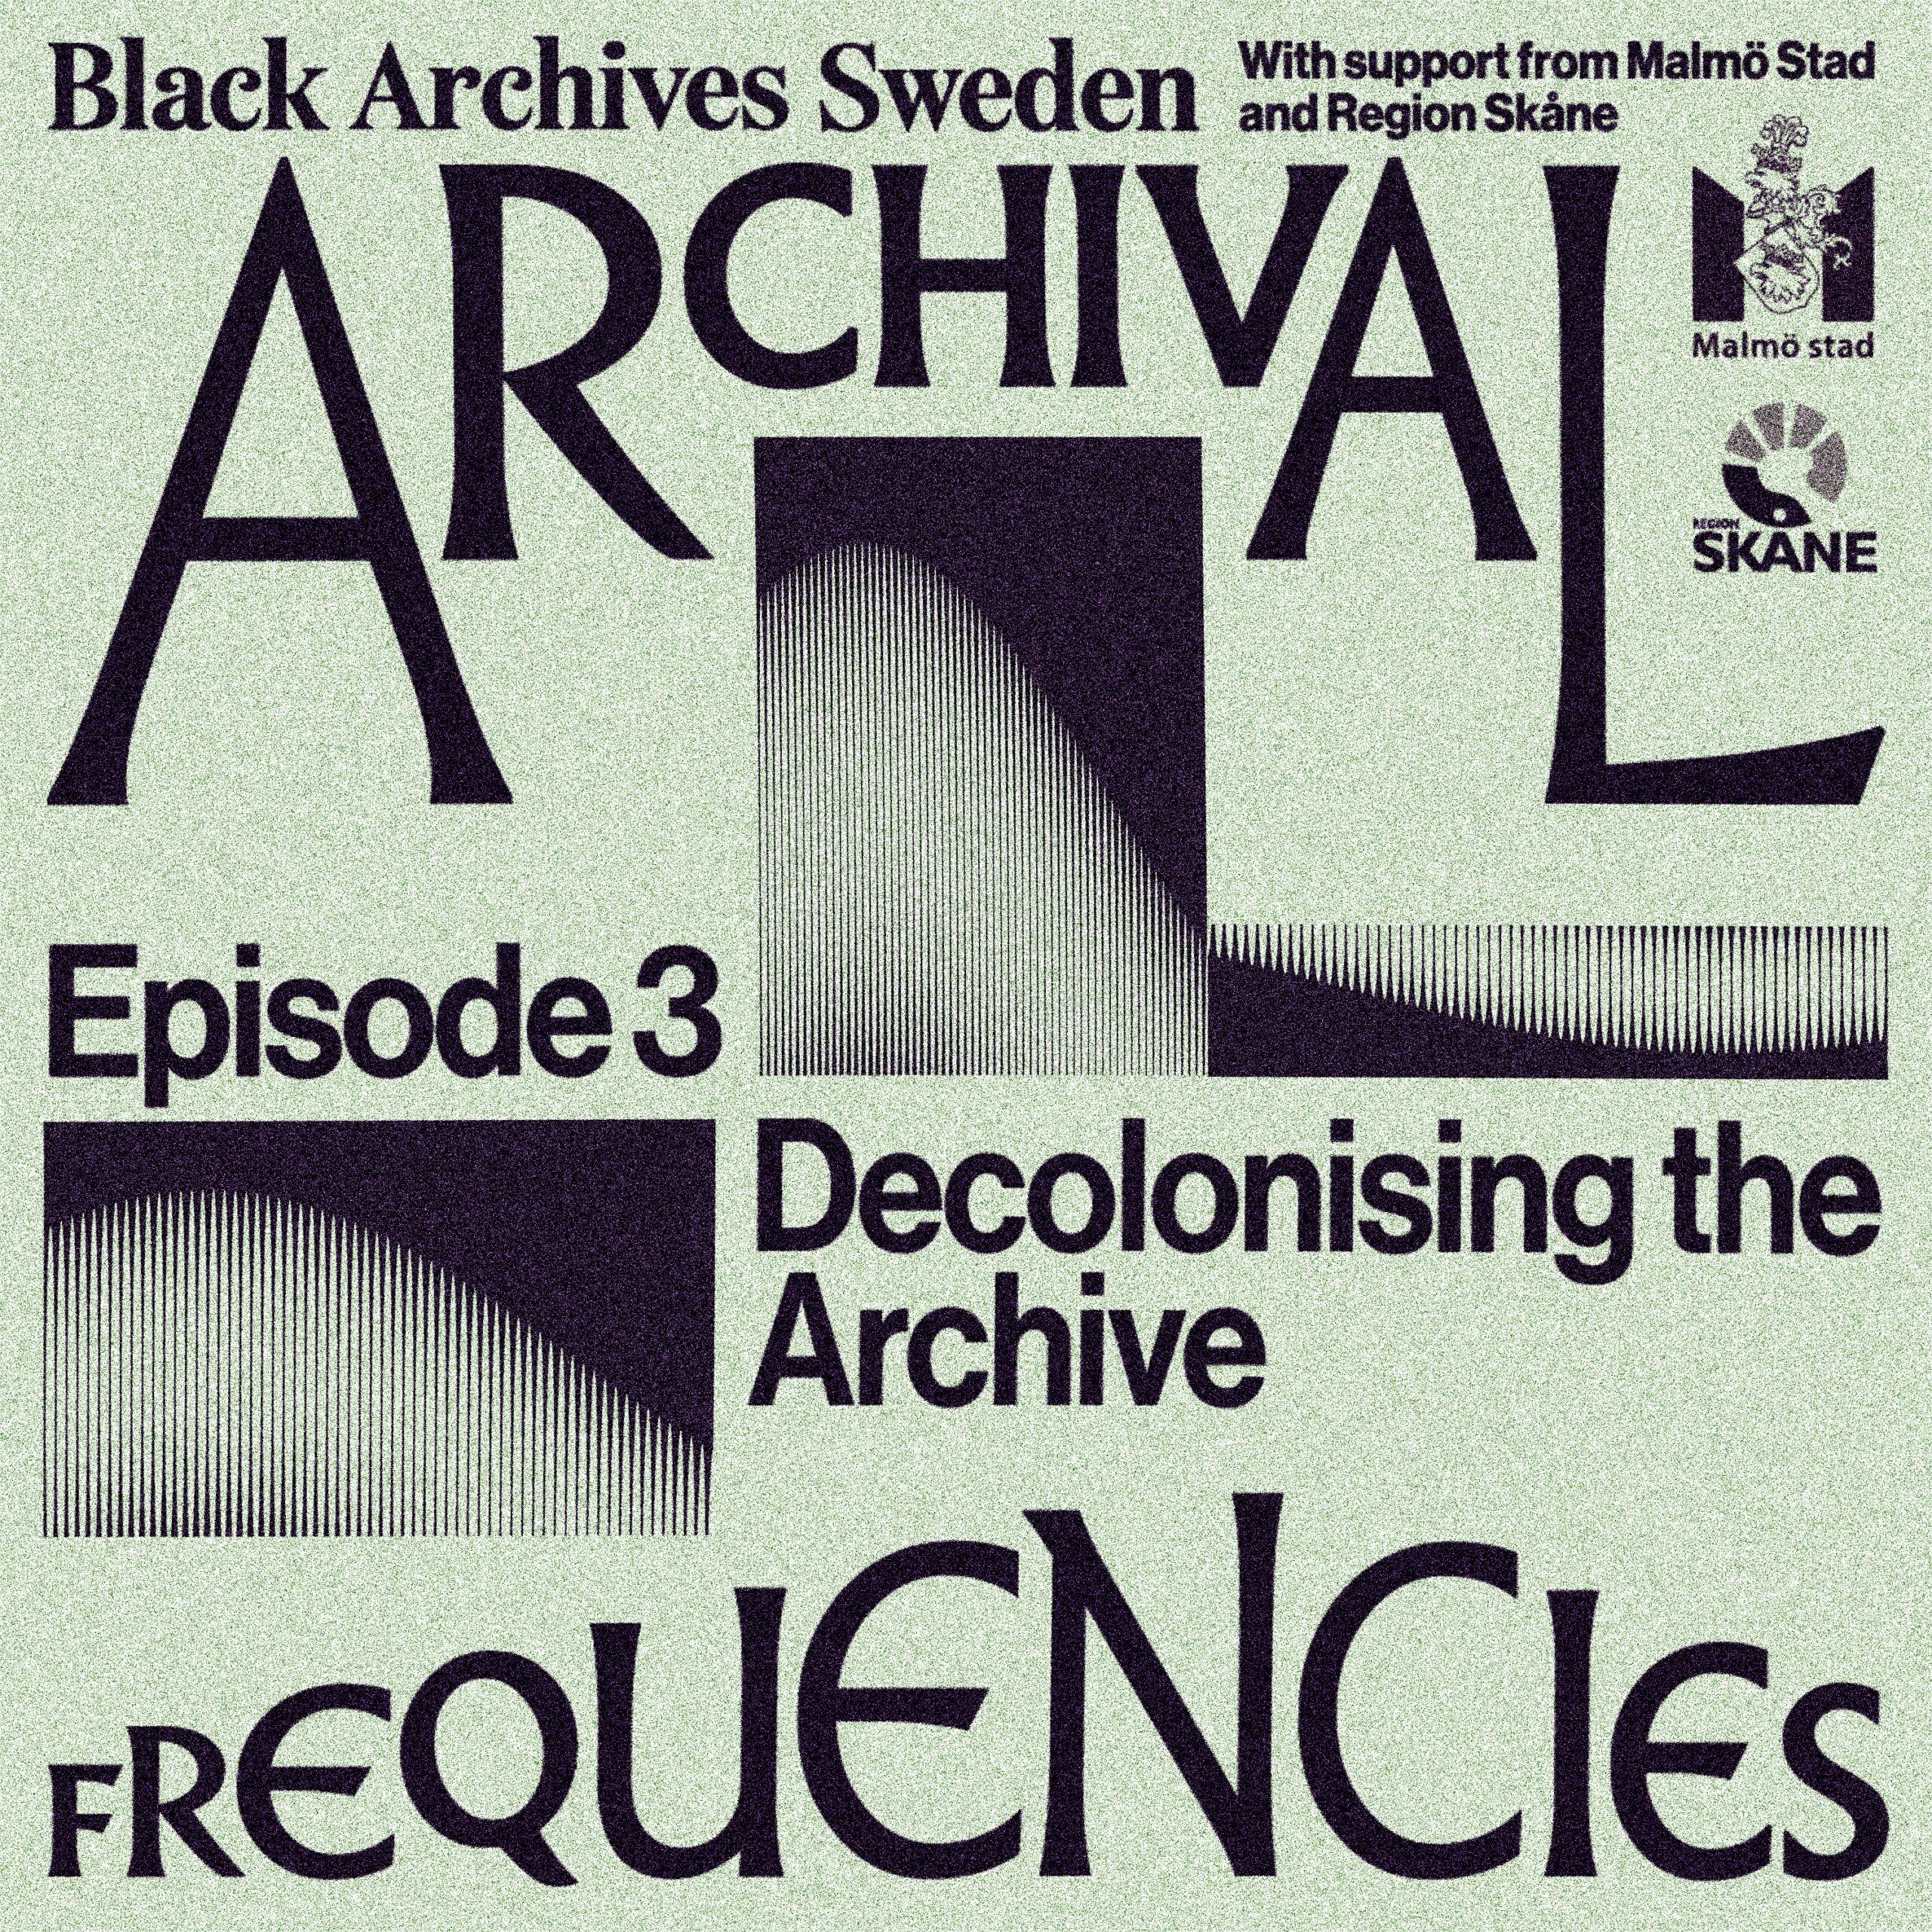 A grey poster with the text archival frequencies and decolonising the archive on. The text is written in black